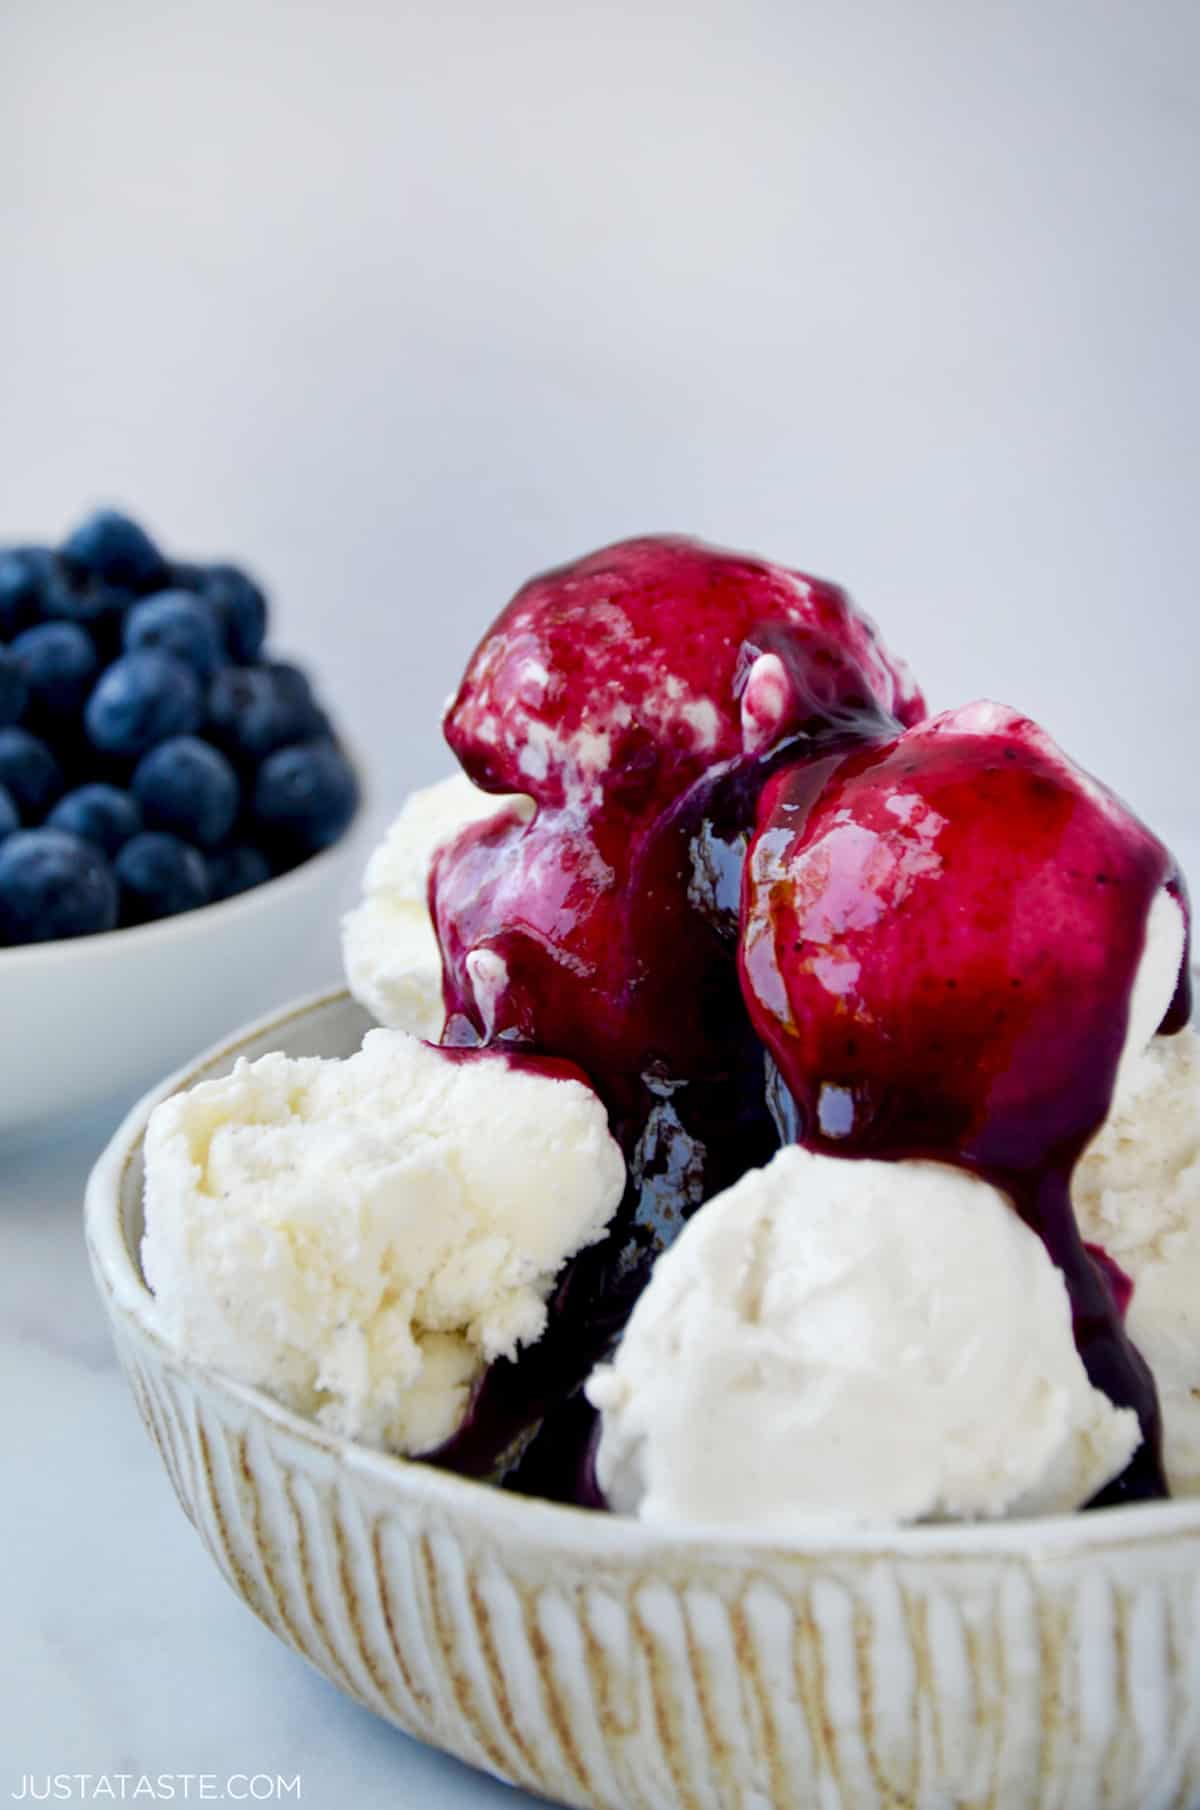 Blueberry sauce covering a bowl of vanilla ice cream. A small bowl with fresh blueberries sits behind the ice cream.